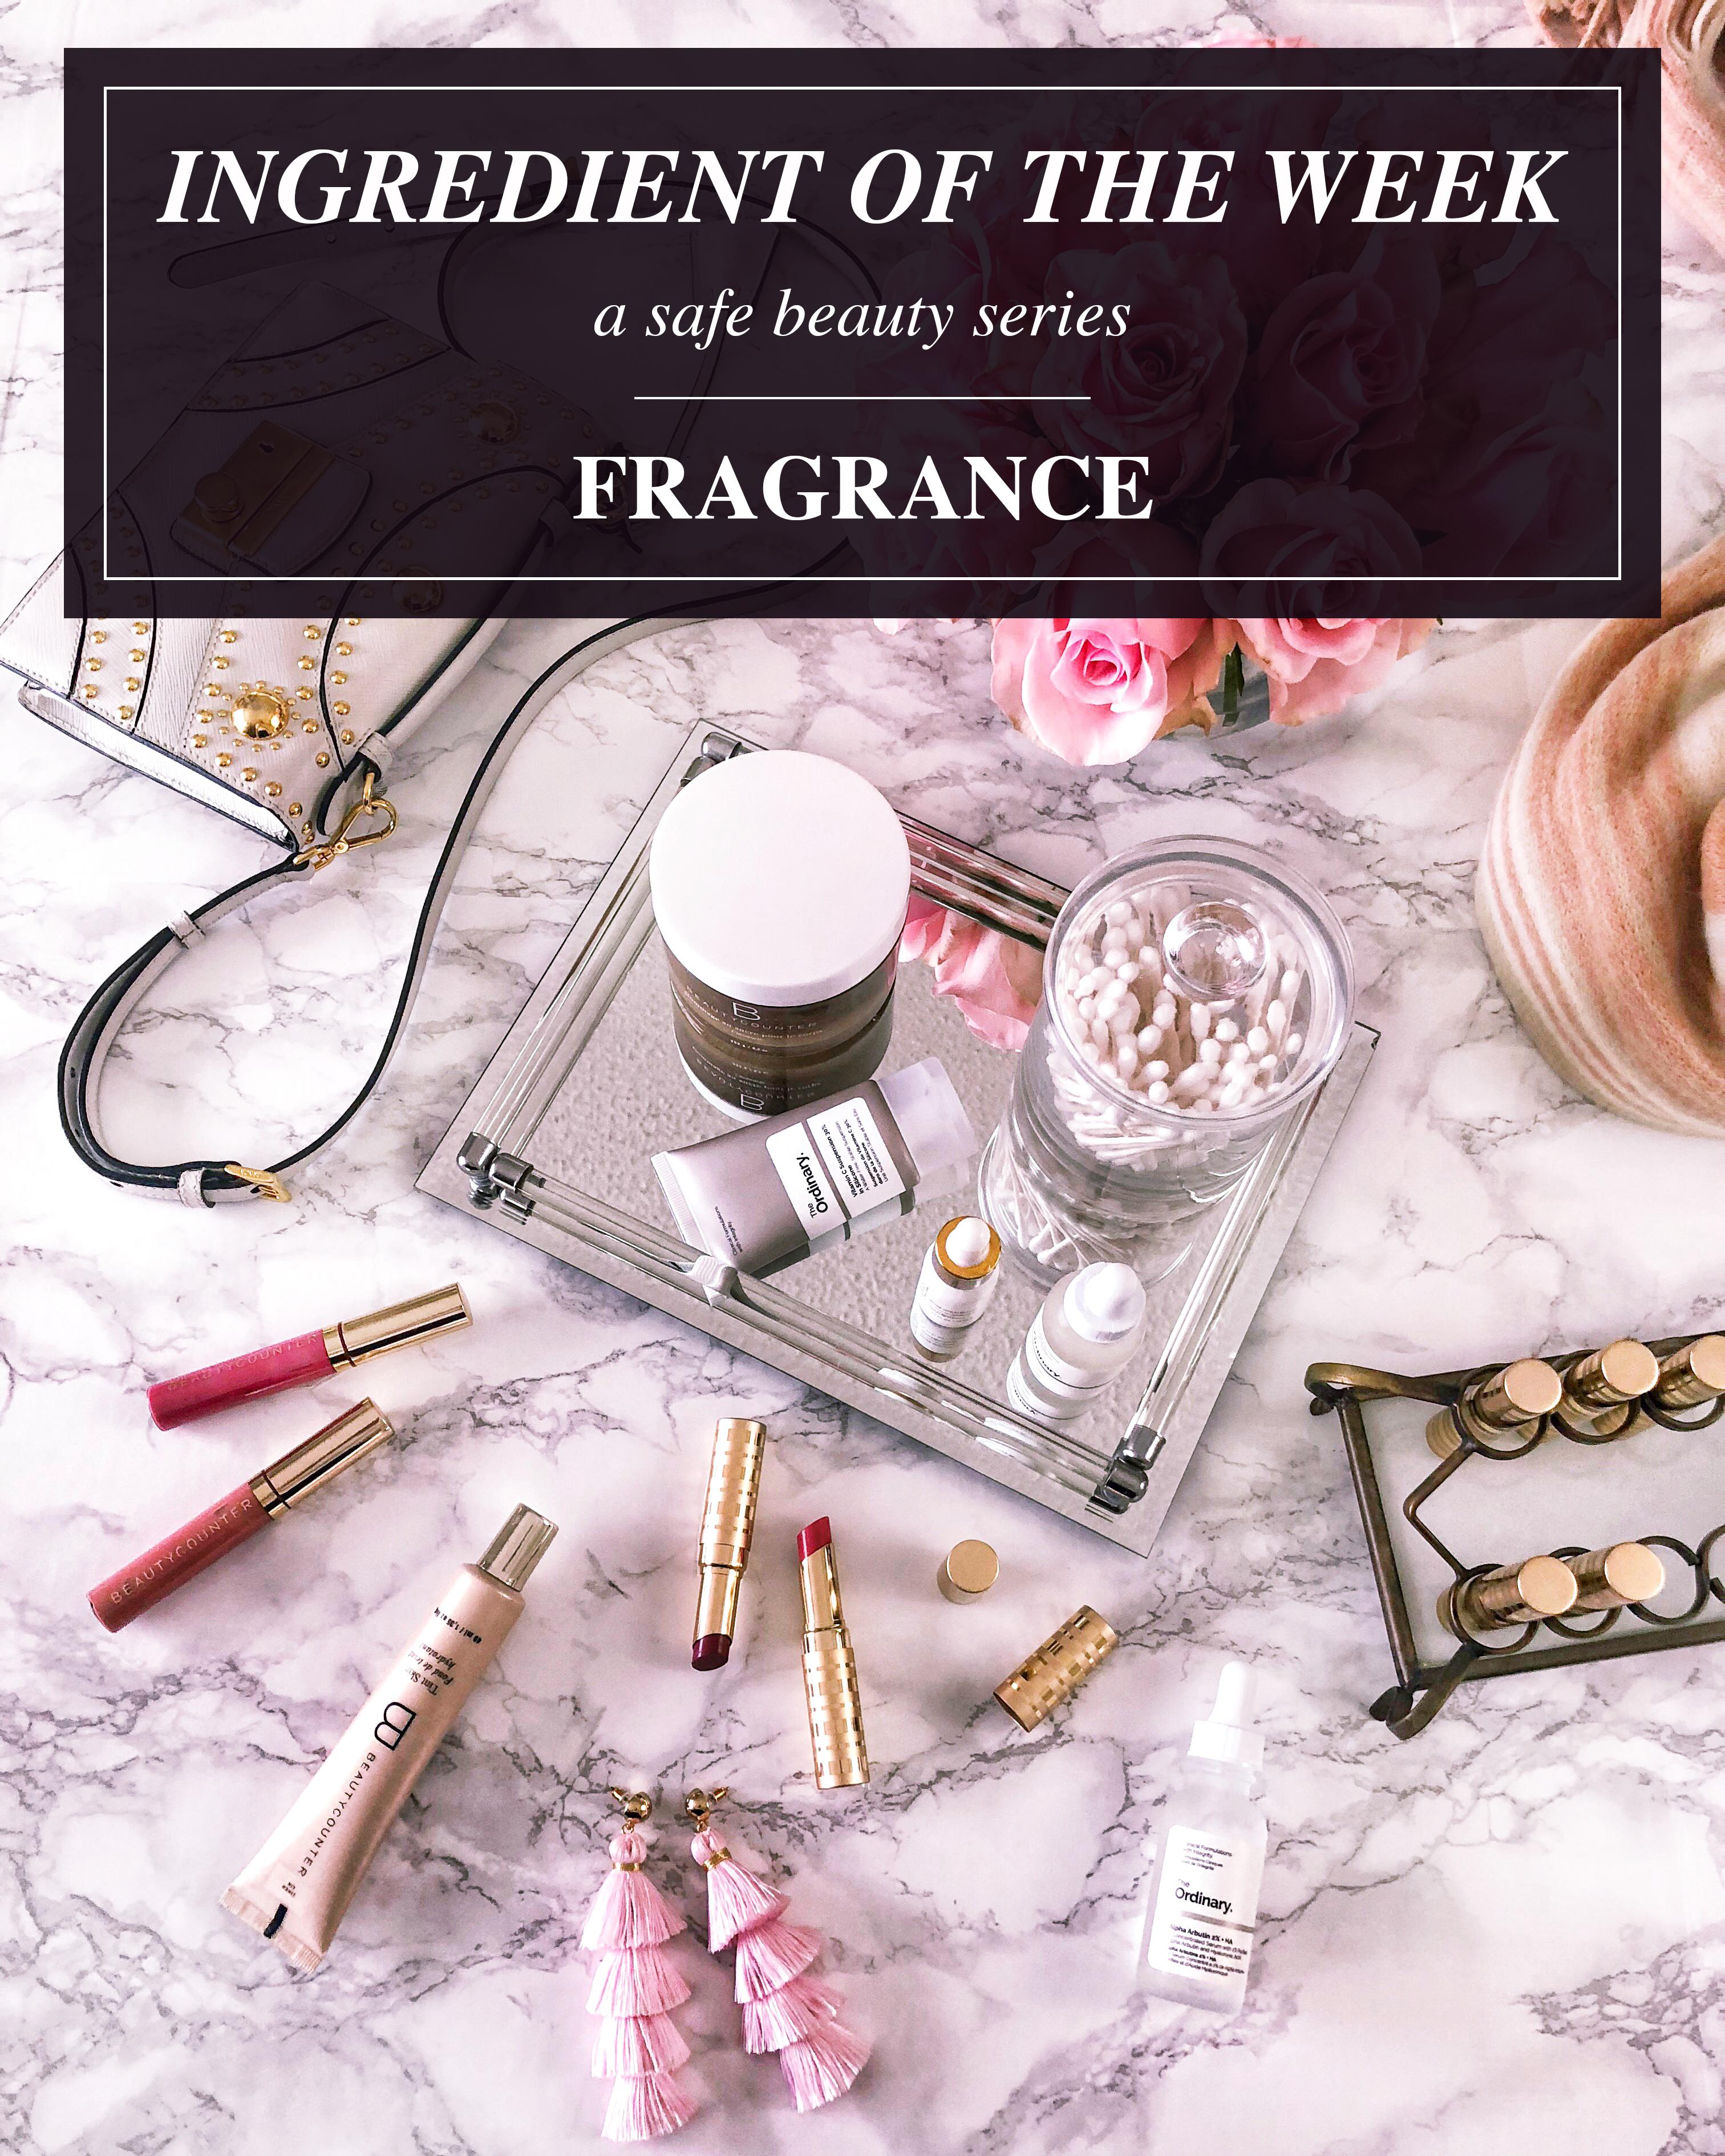 is fragrance and perfume safe to use